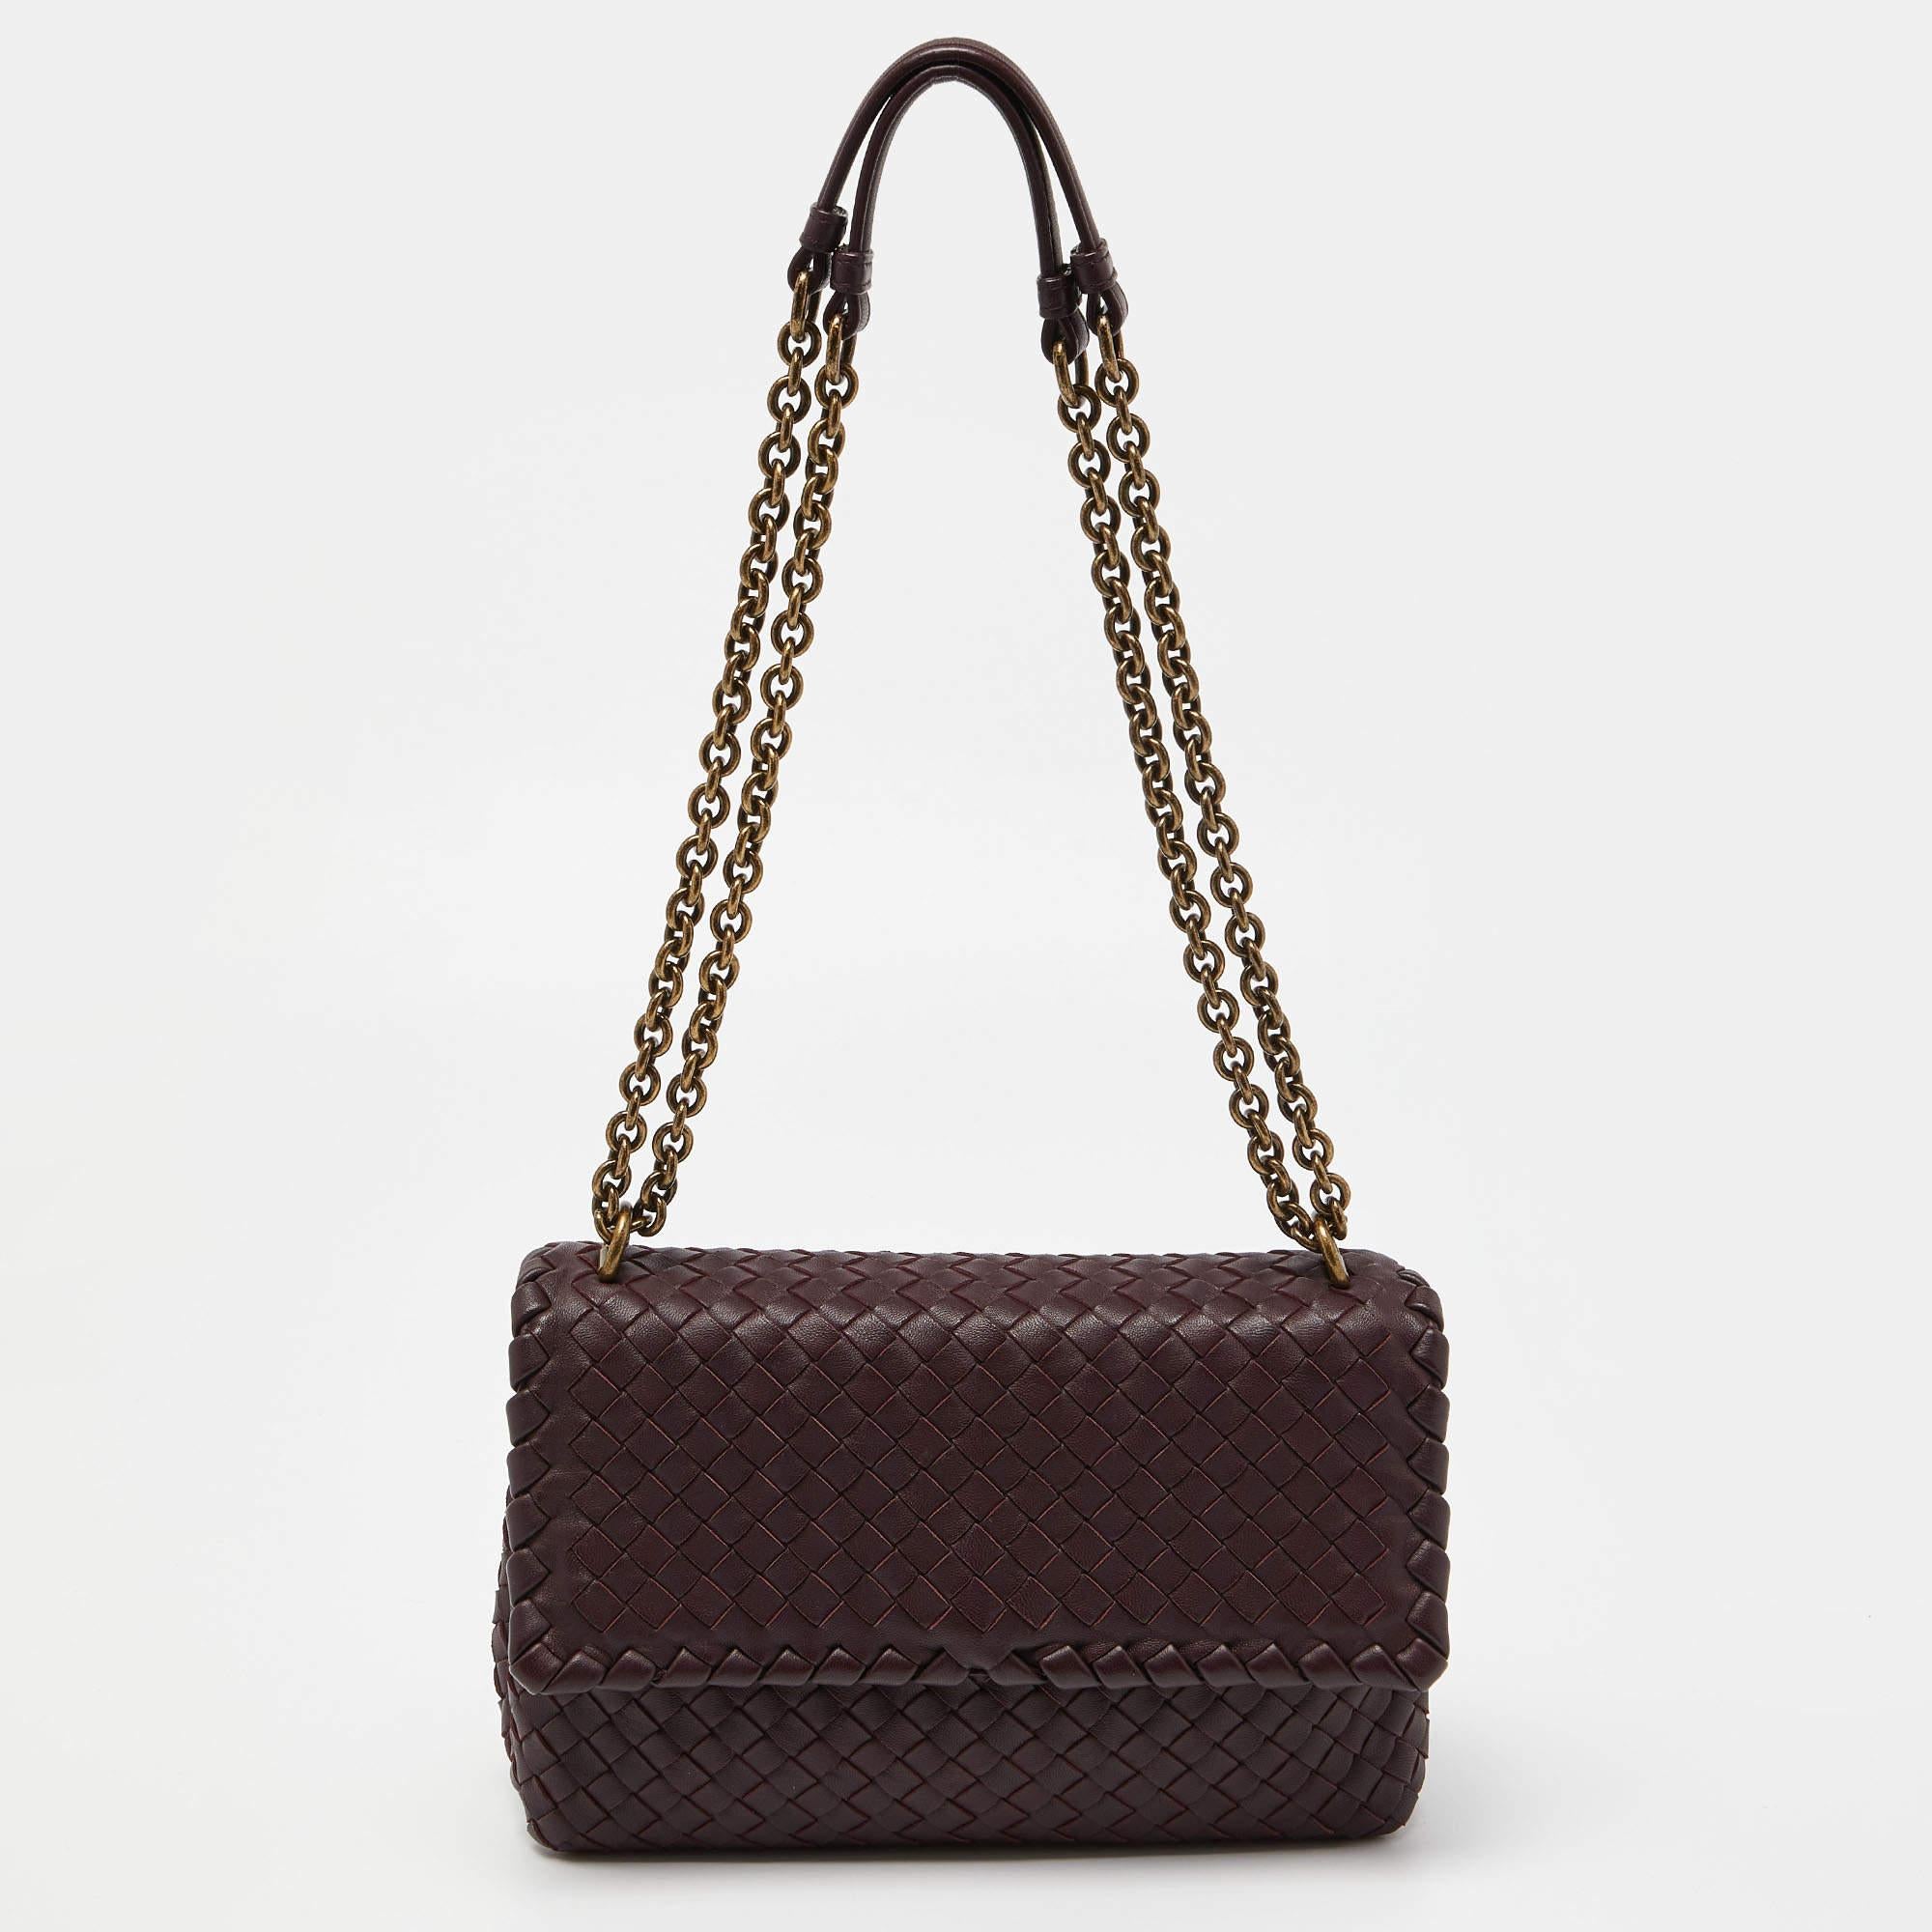 For a look that is complete with style, taste, and a touch of luxe, this designer bag is the perfect addition. Flaunt this beauty on your shoulder and revel in the taste of luxury it leaves you with.

